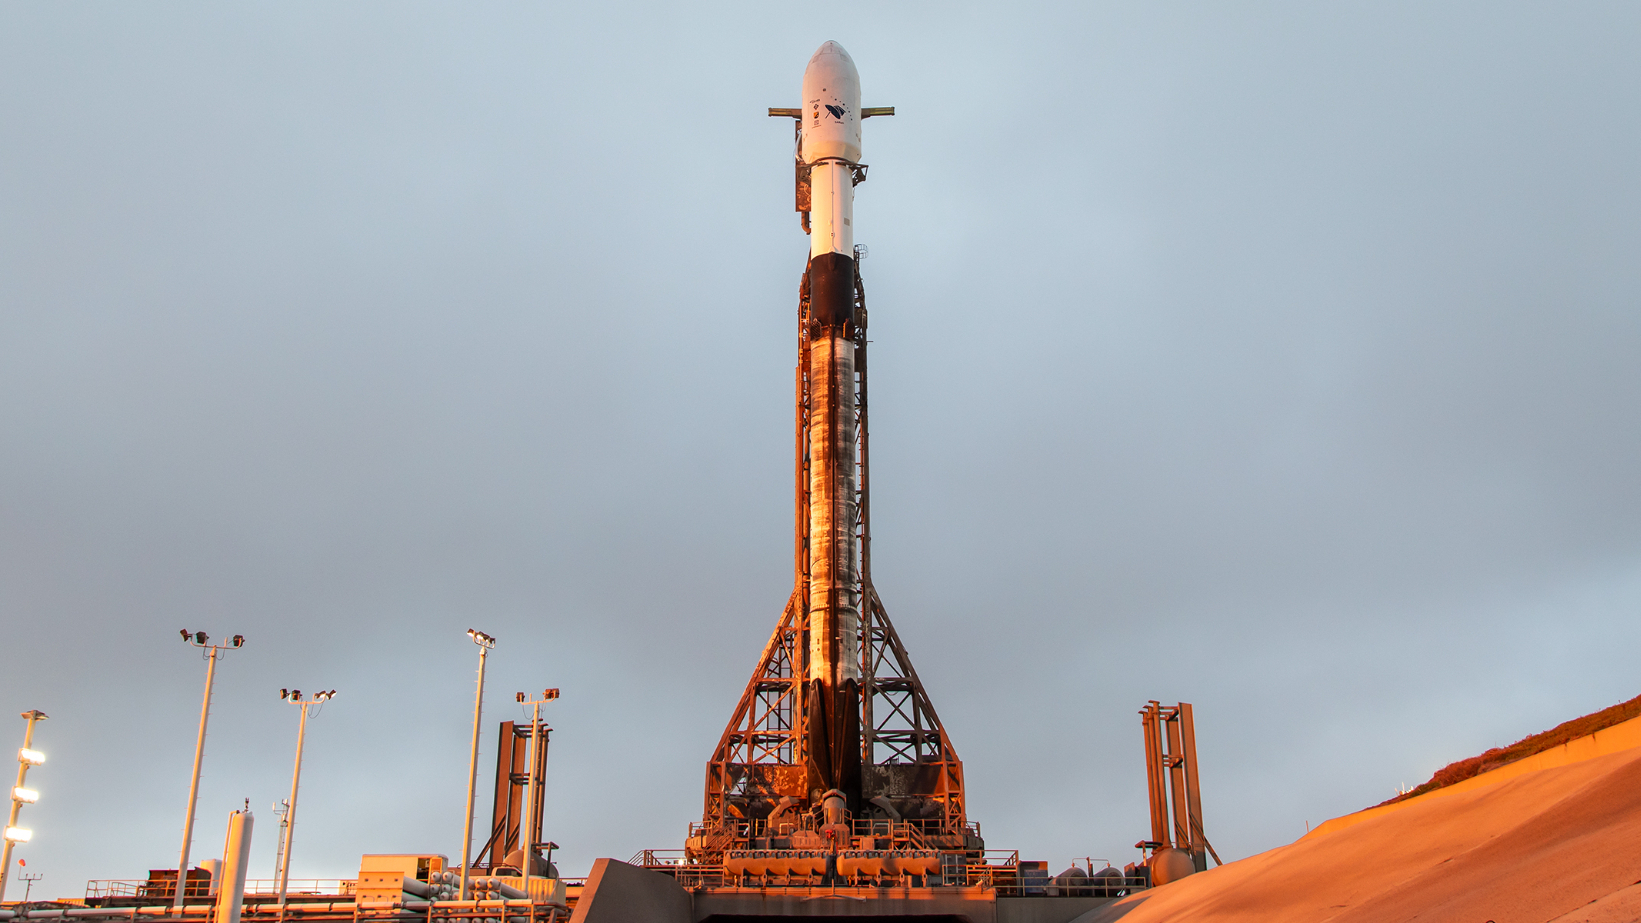 SpaceX Falcon 9 rocket to launch 2 German military satellites early Dec. 23 Space